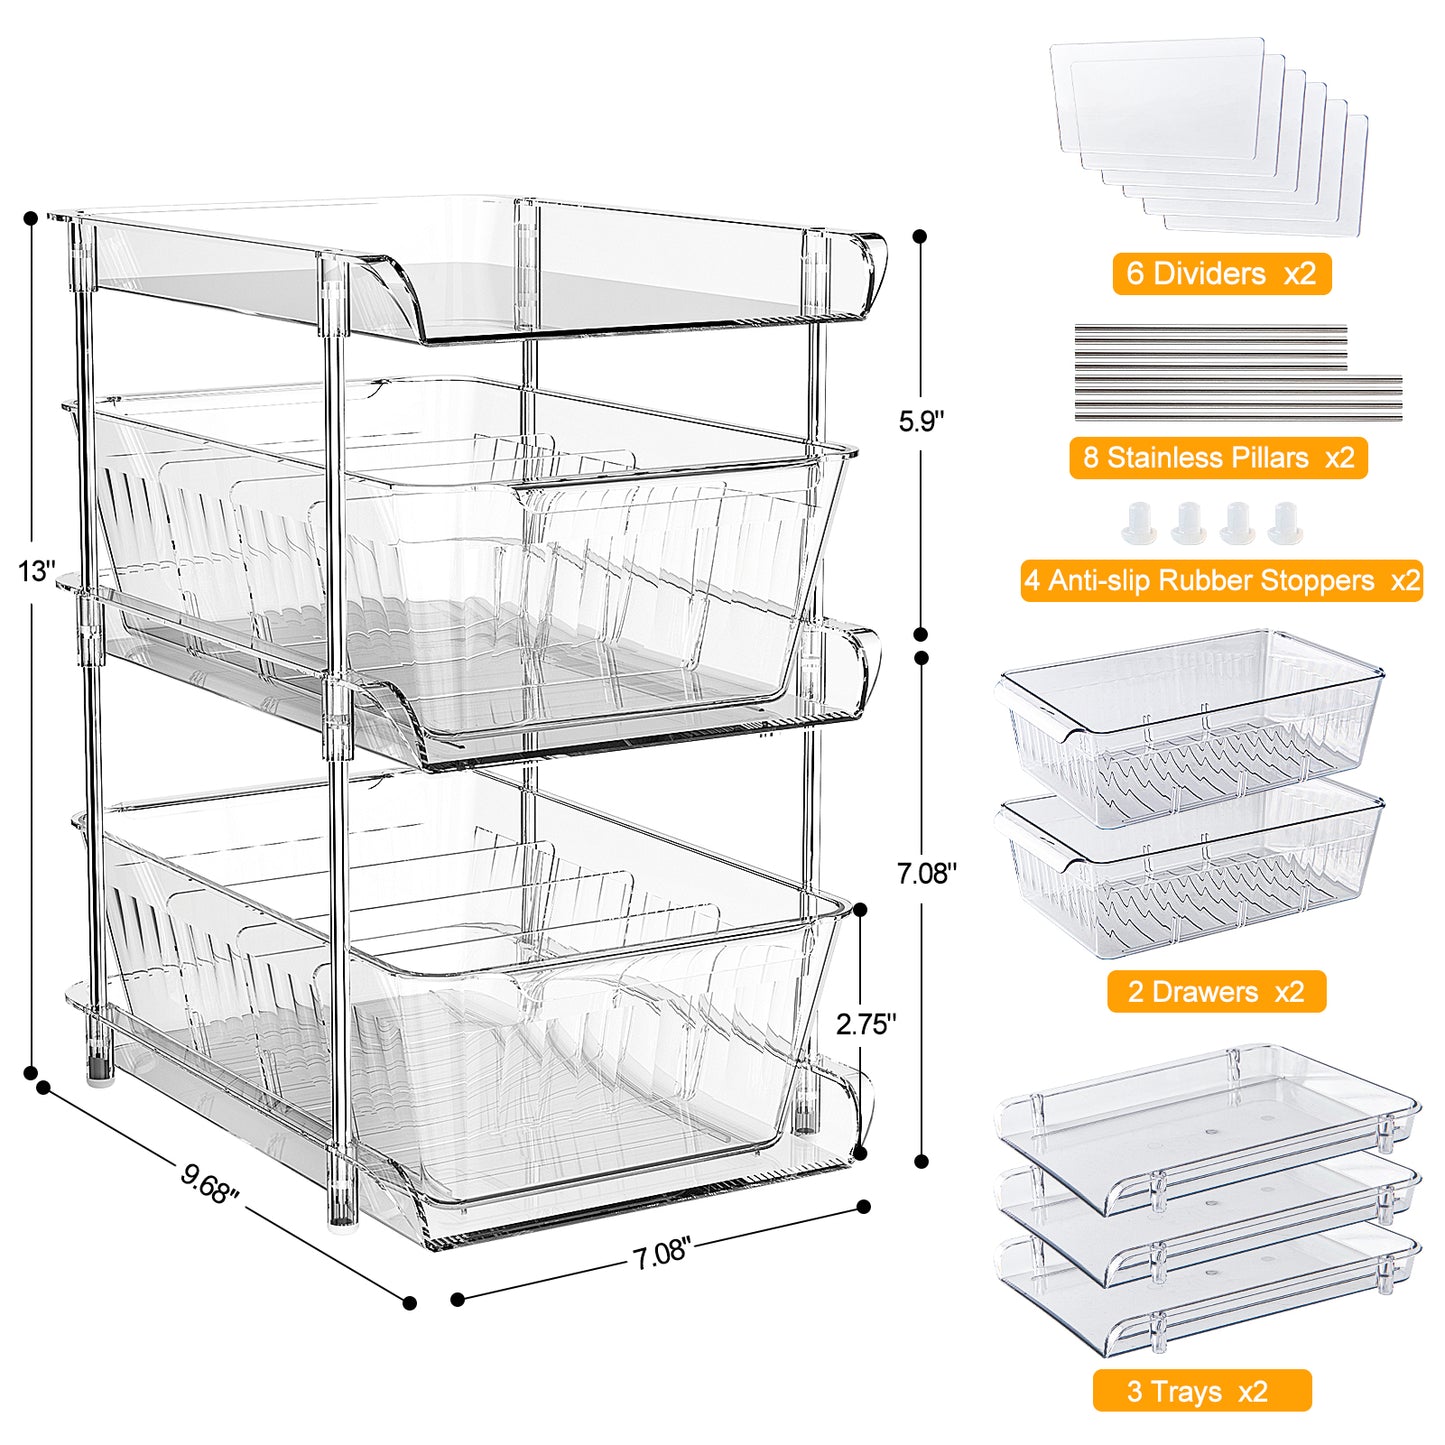 GoMaihe 3 Tier Bathroom Organizer with Dividers 2-Pack, Transparent